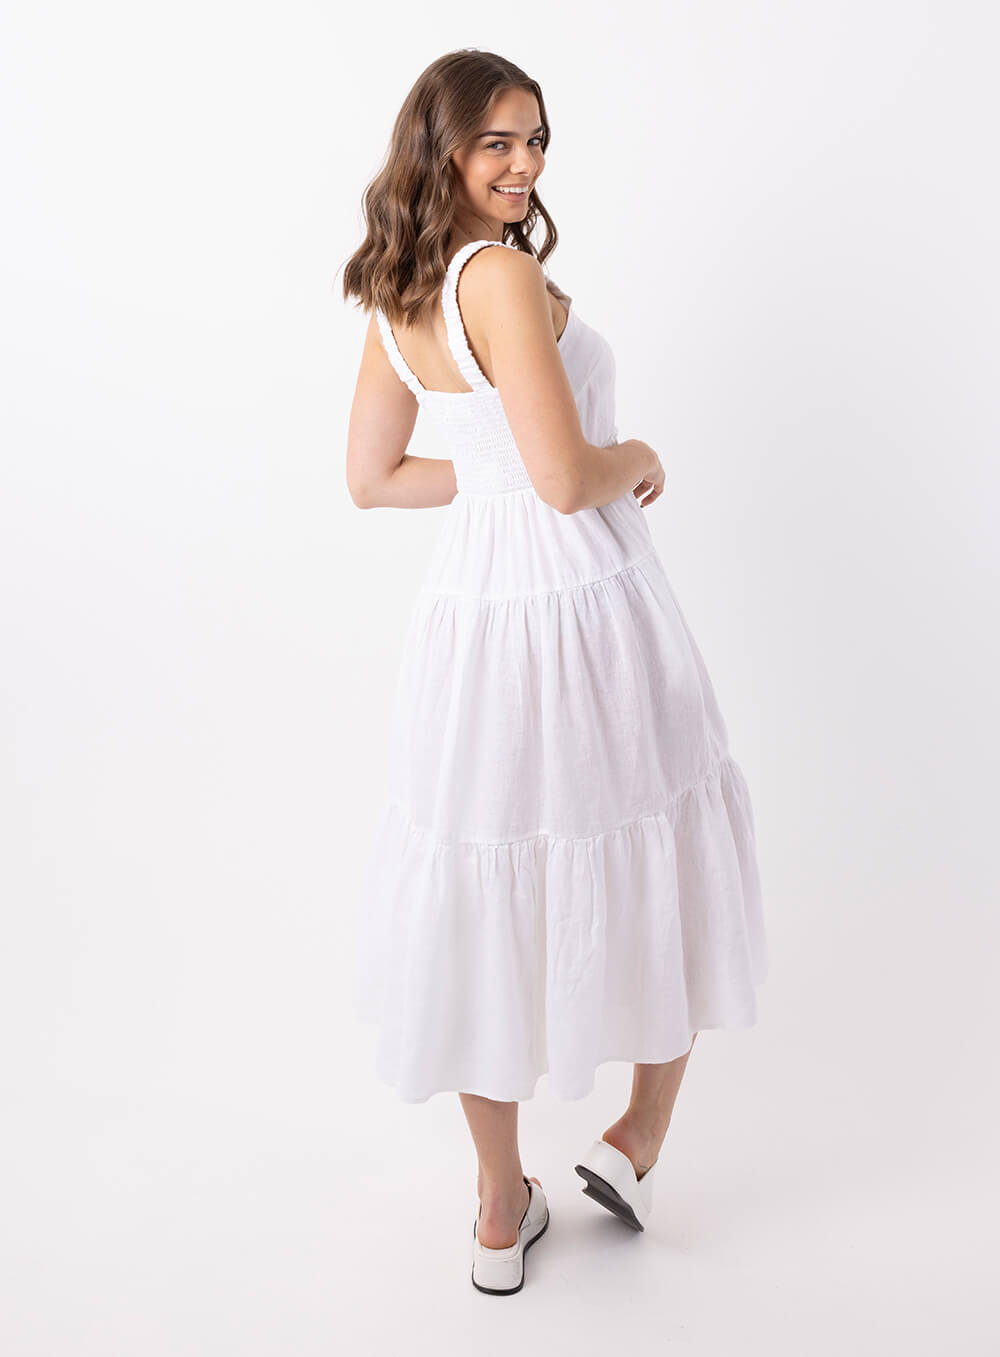 The Finlay Linen dress in white is made from 100% breathable linen, featuring a tiered skirt, thin rouched straps and 2 side pockets